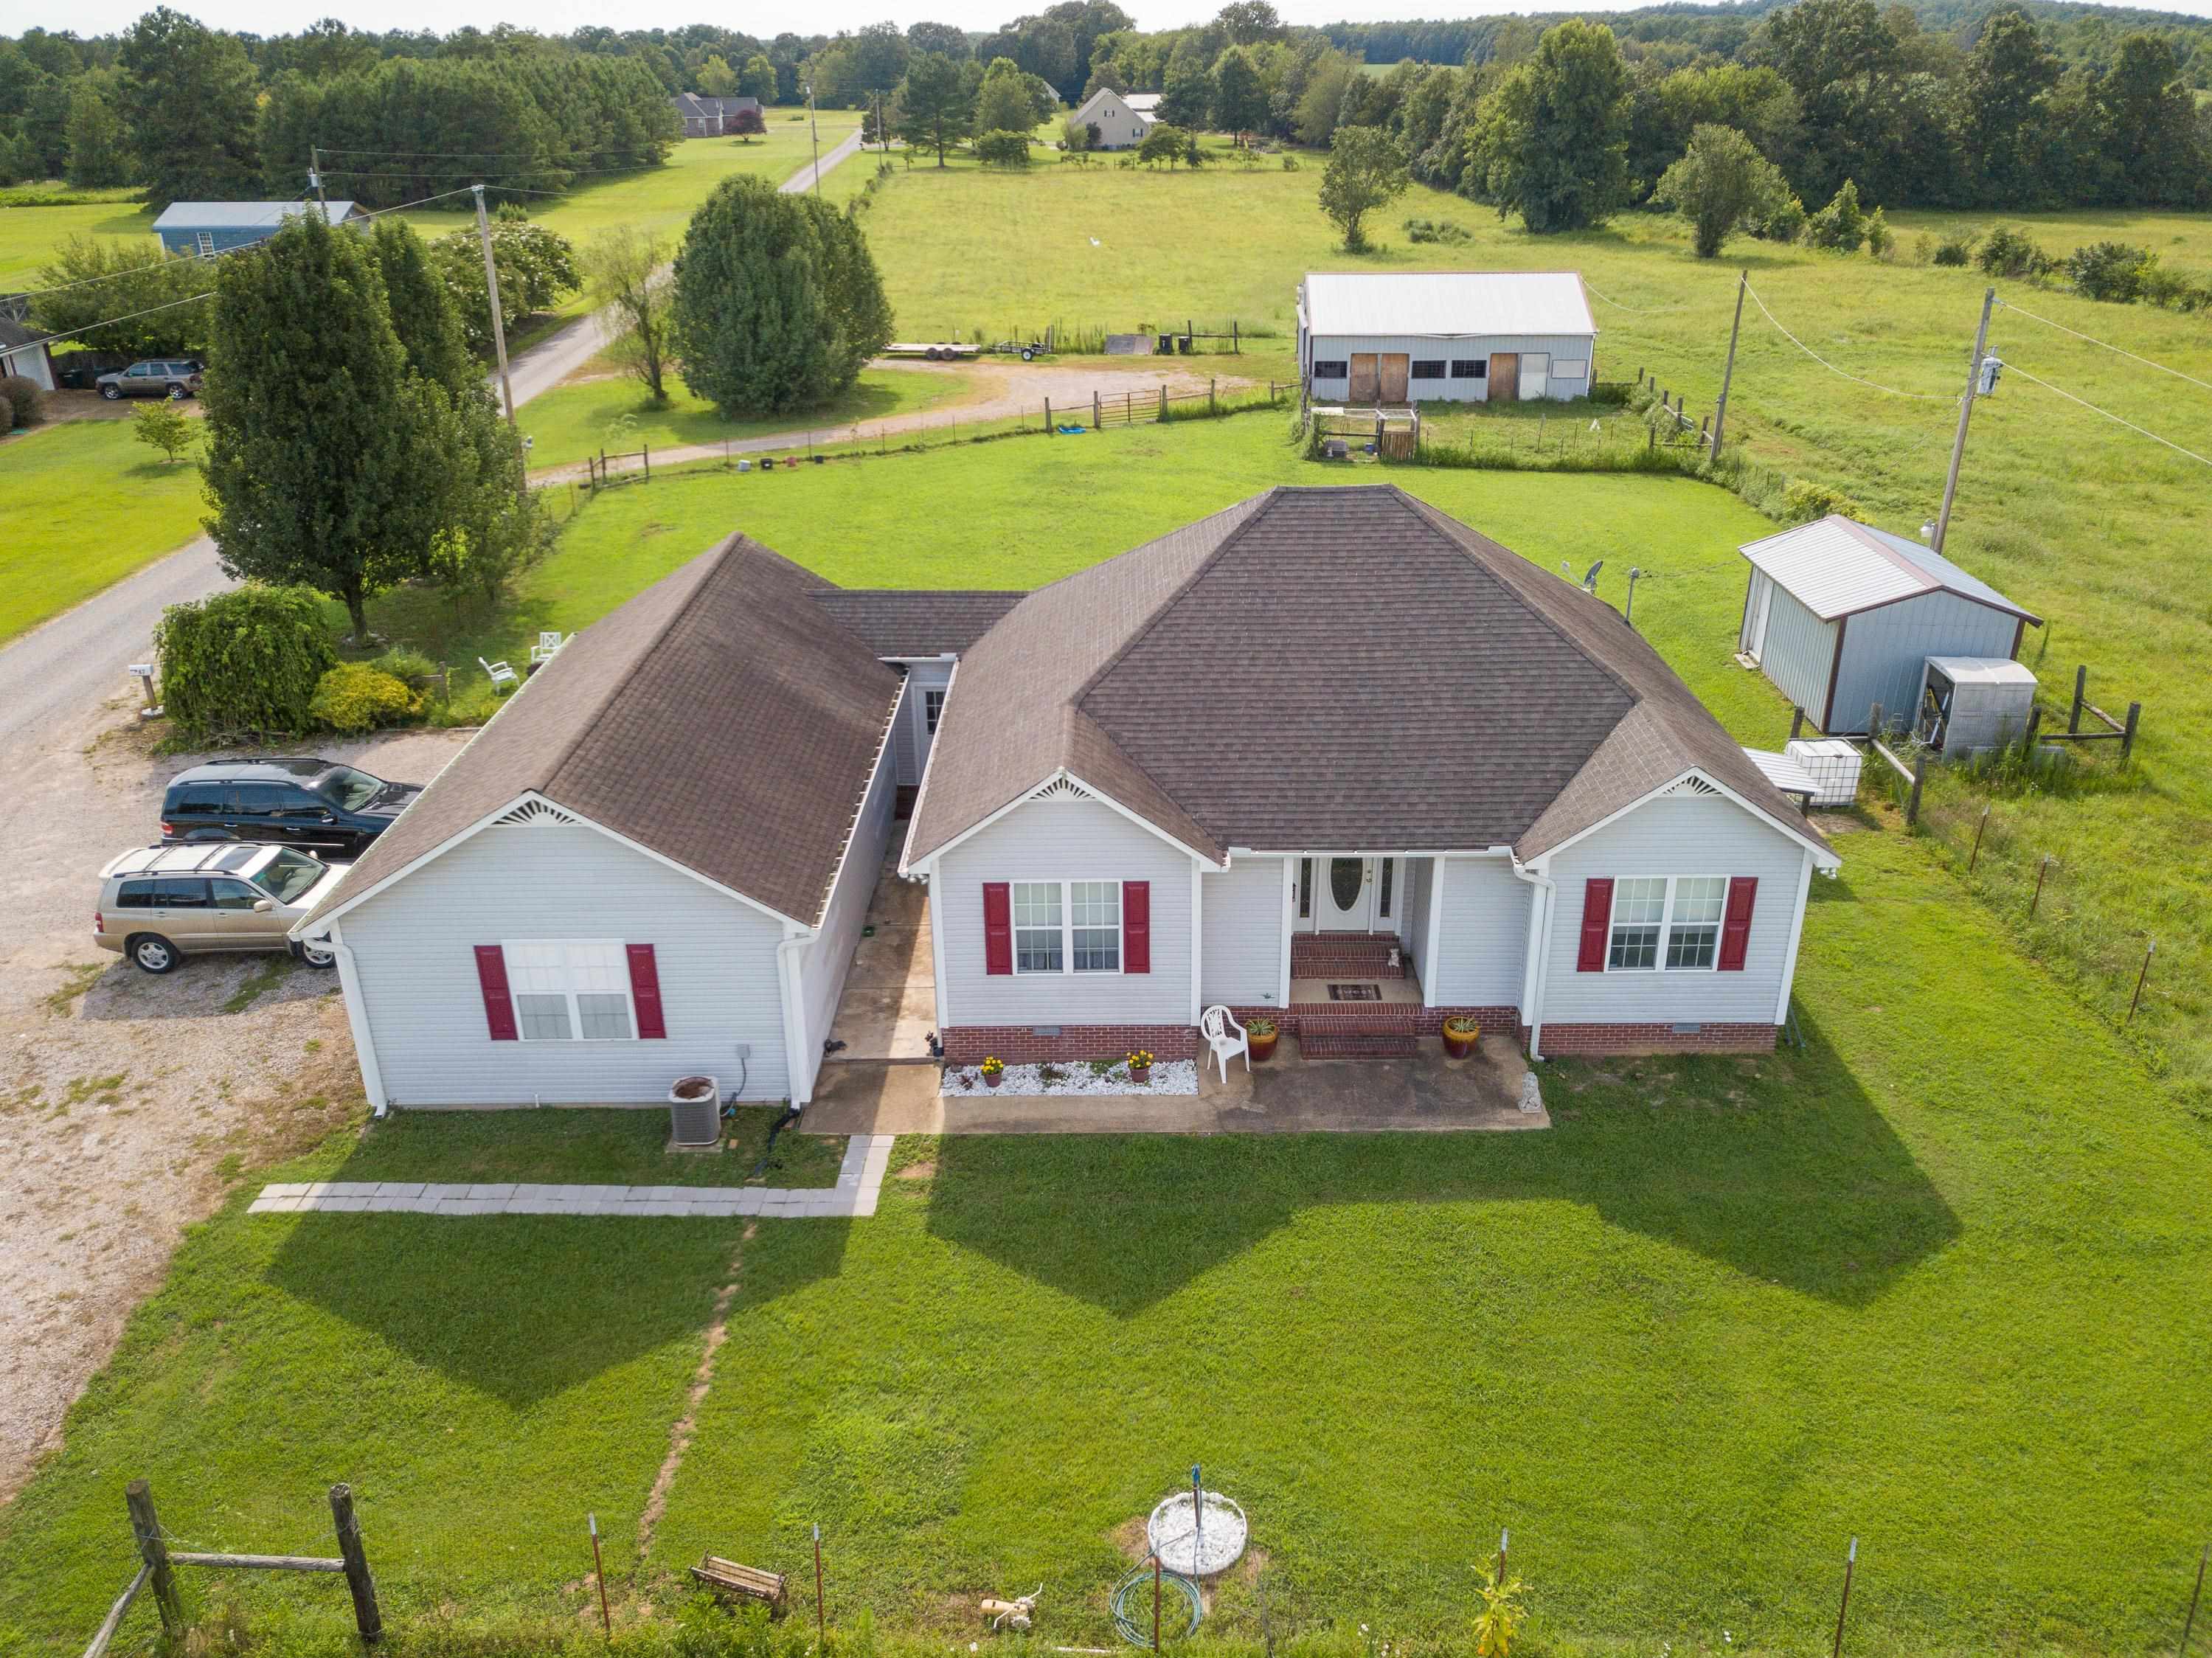 47 Nabors, Shiloh, Tennessee image 1